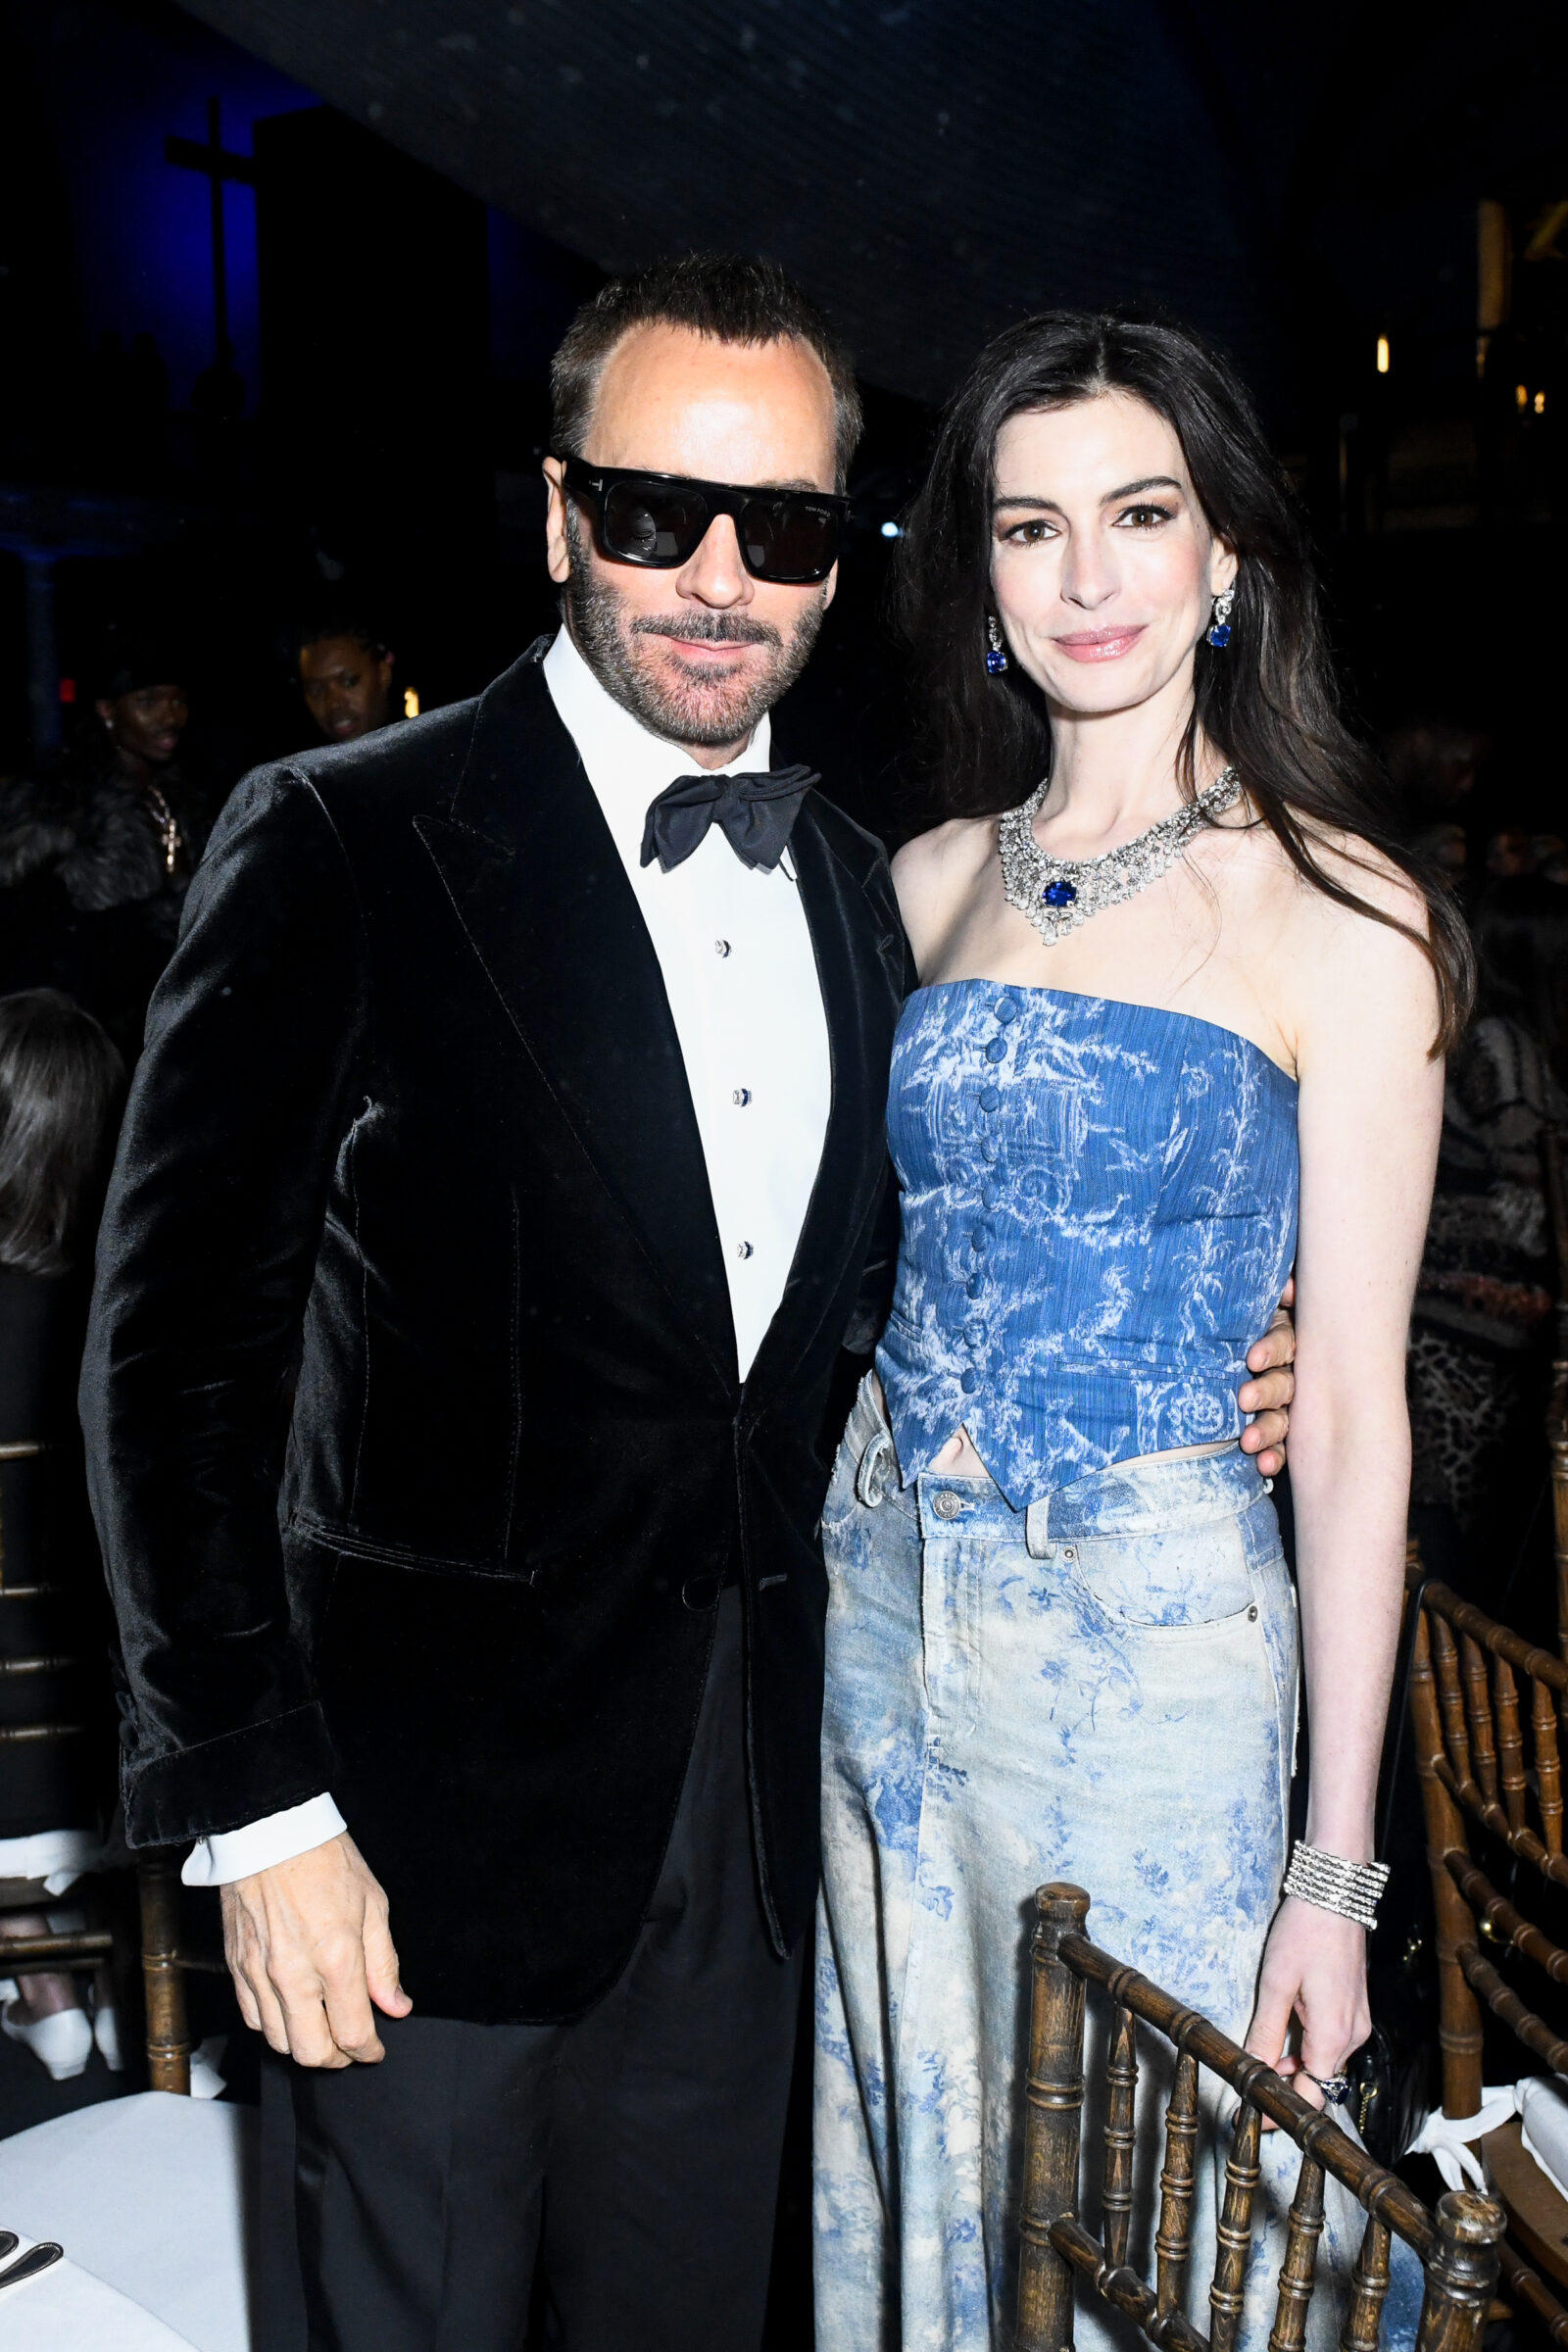 Elegance and style at the CFDA 2023: Designer Tom Ford and actress Anne Hathaway captivate in evening attire.